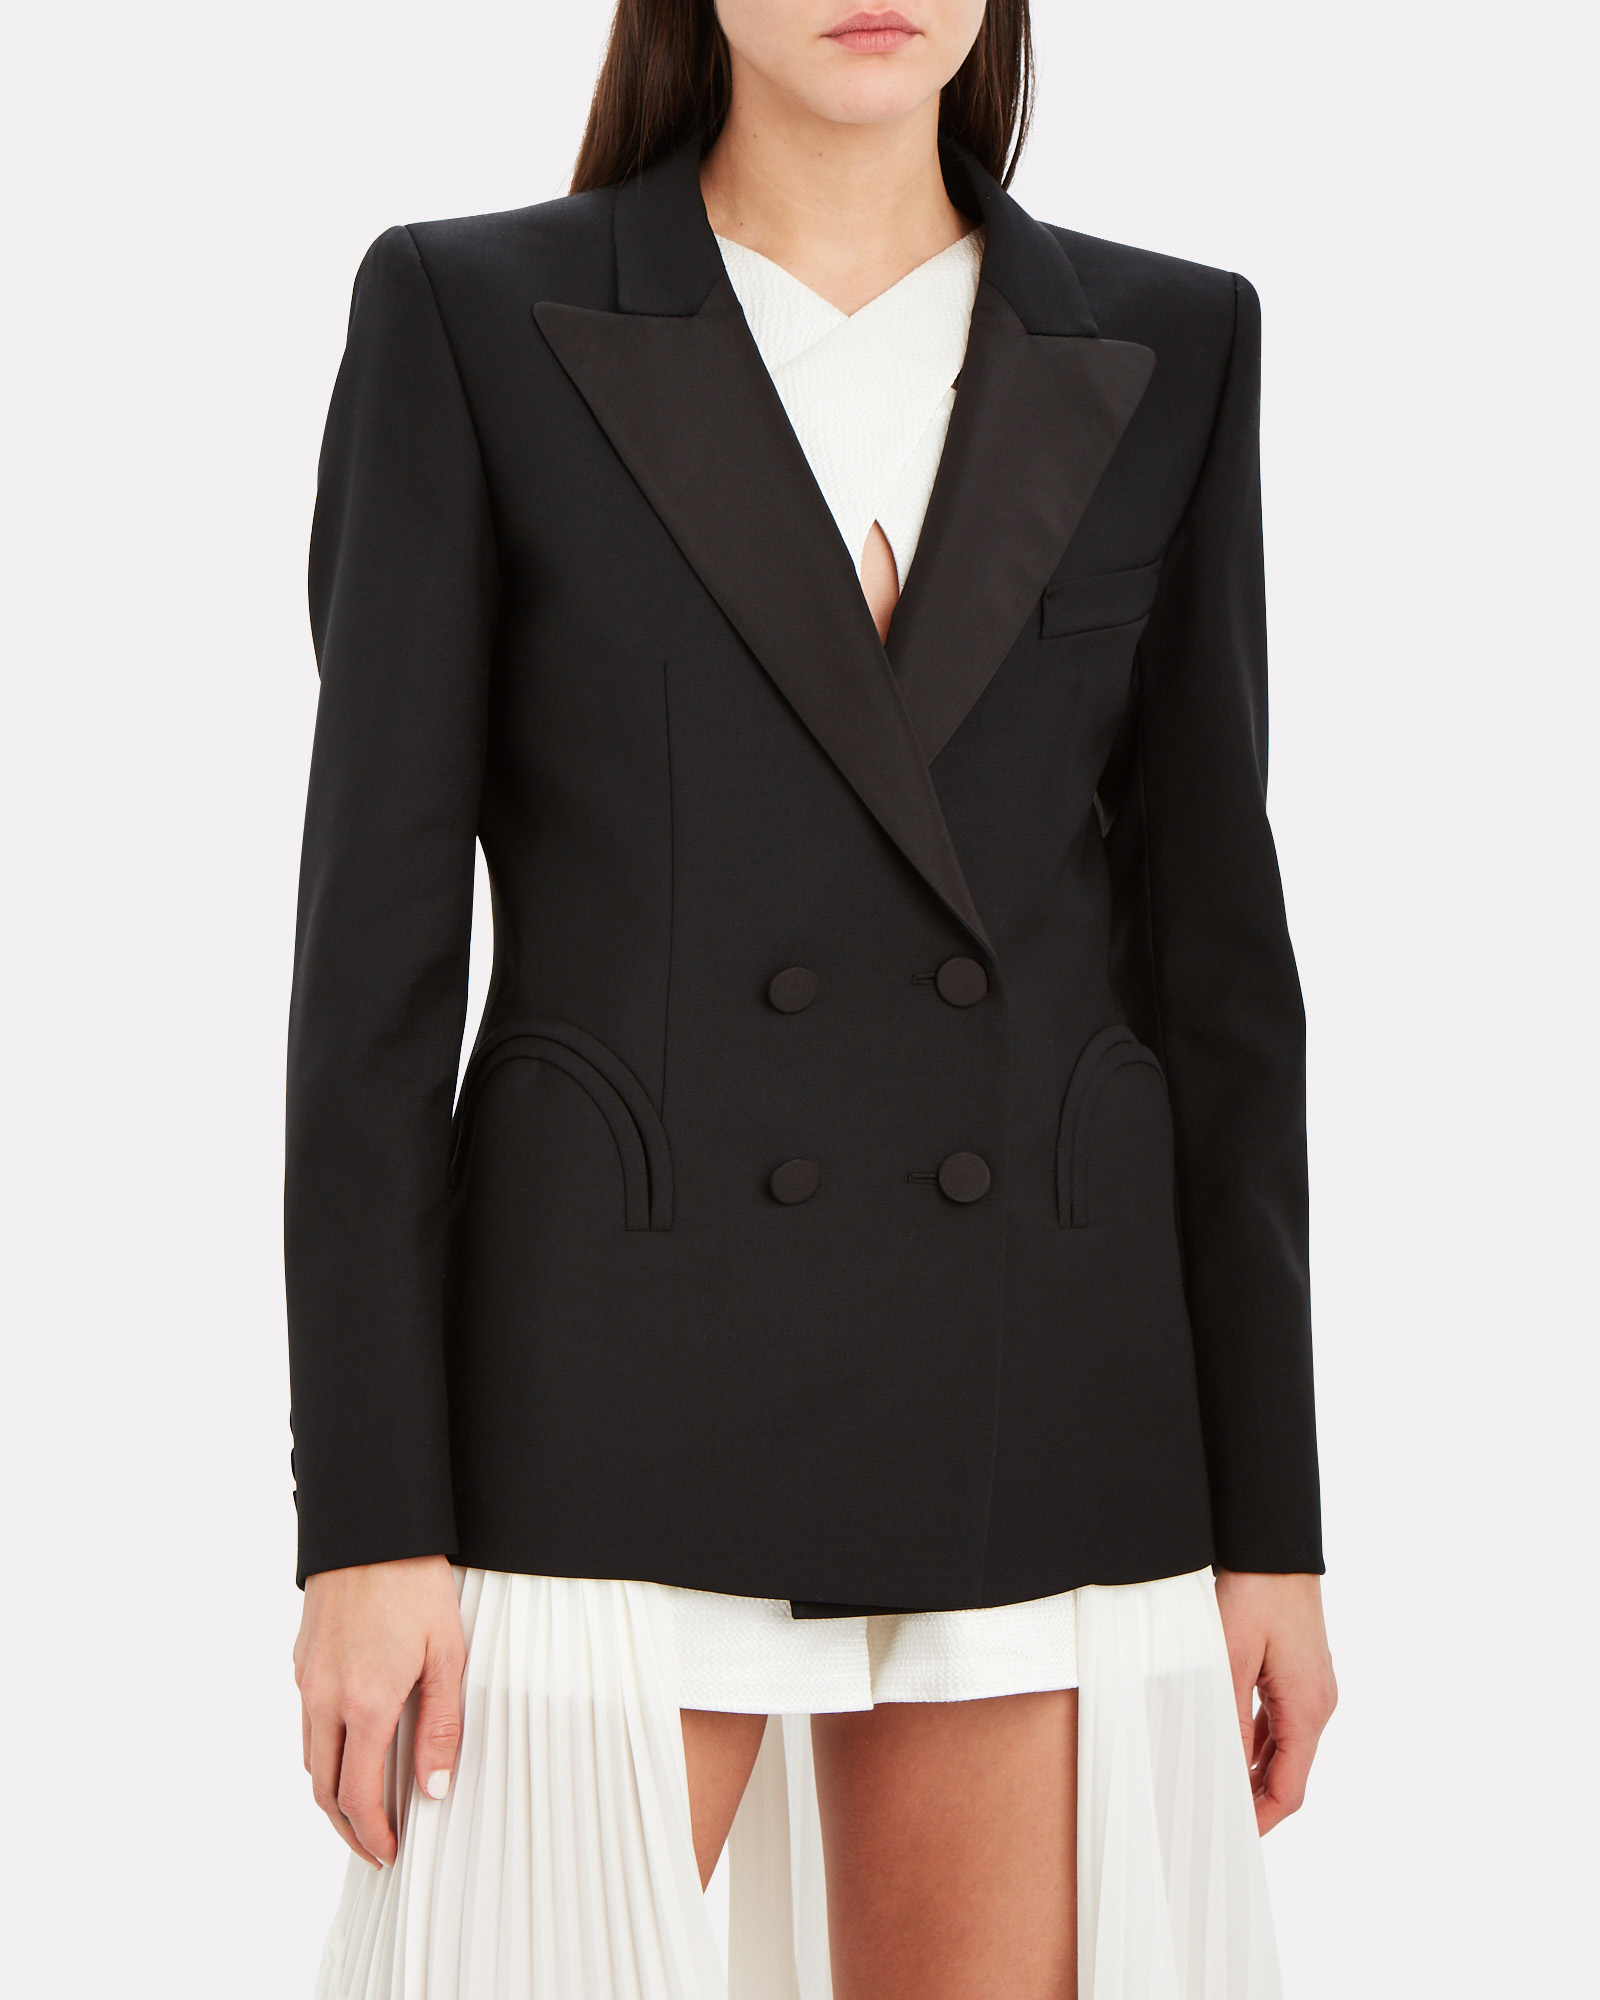 Blazé Milano | Charmer Fitted Double-Breasted Blazer | INTERMIX®